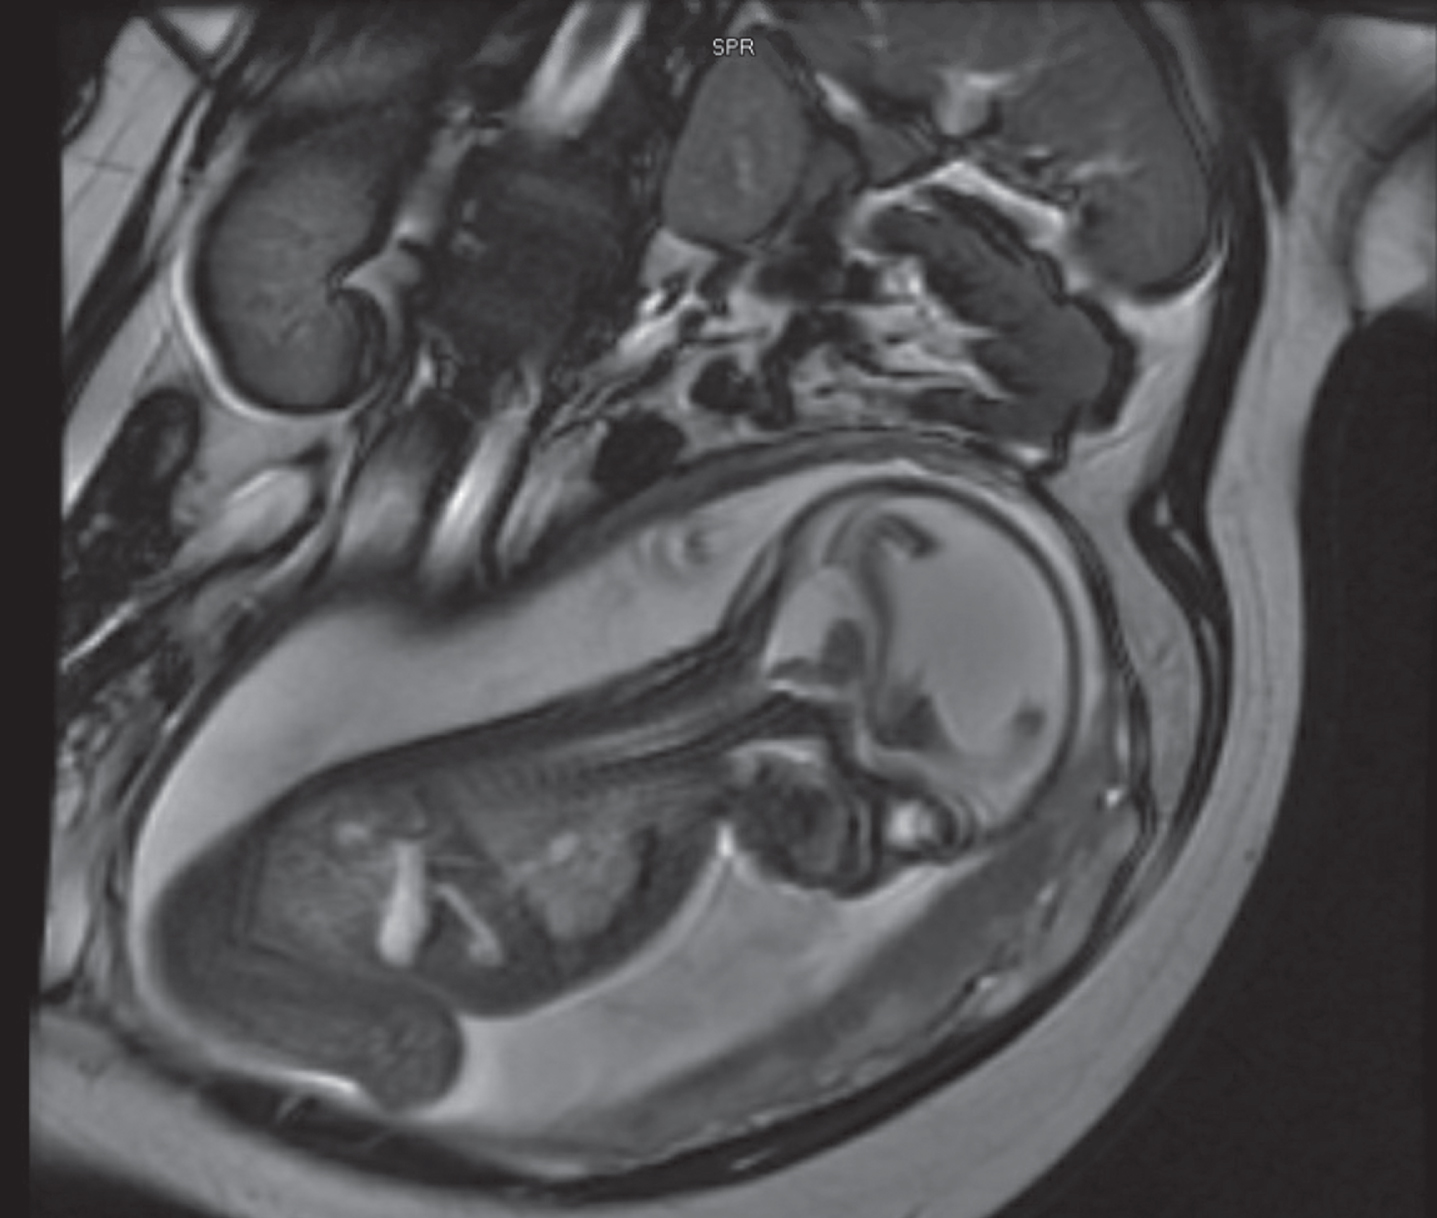 27 weeks fetal MRI showing massive ventriculomegaly, with associated cystic dilatation of posterior fossa consistent with Dandy Walker malformation